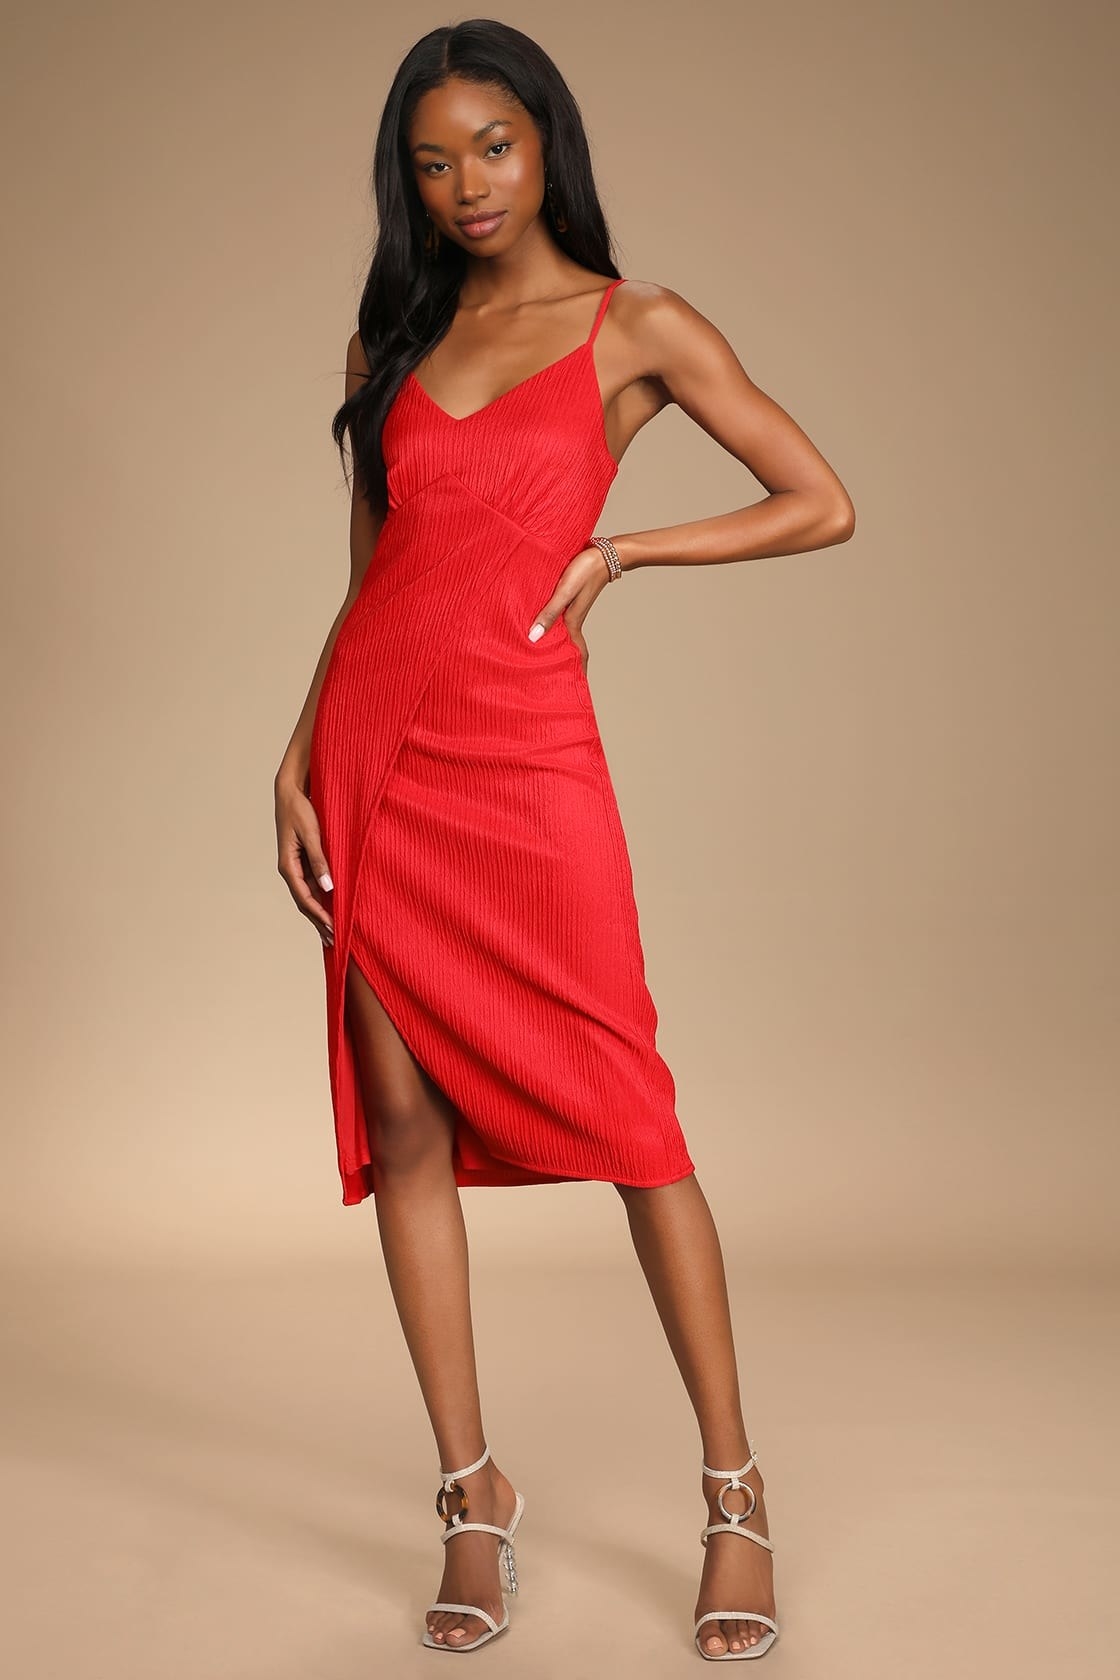 a model wearing the dress in red